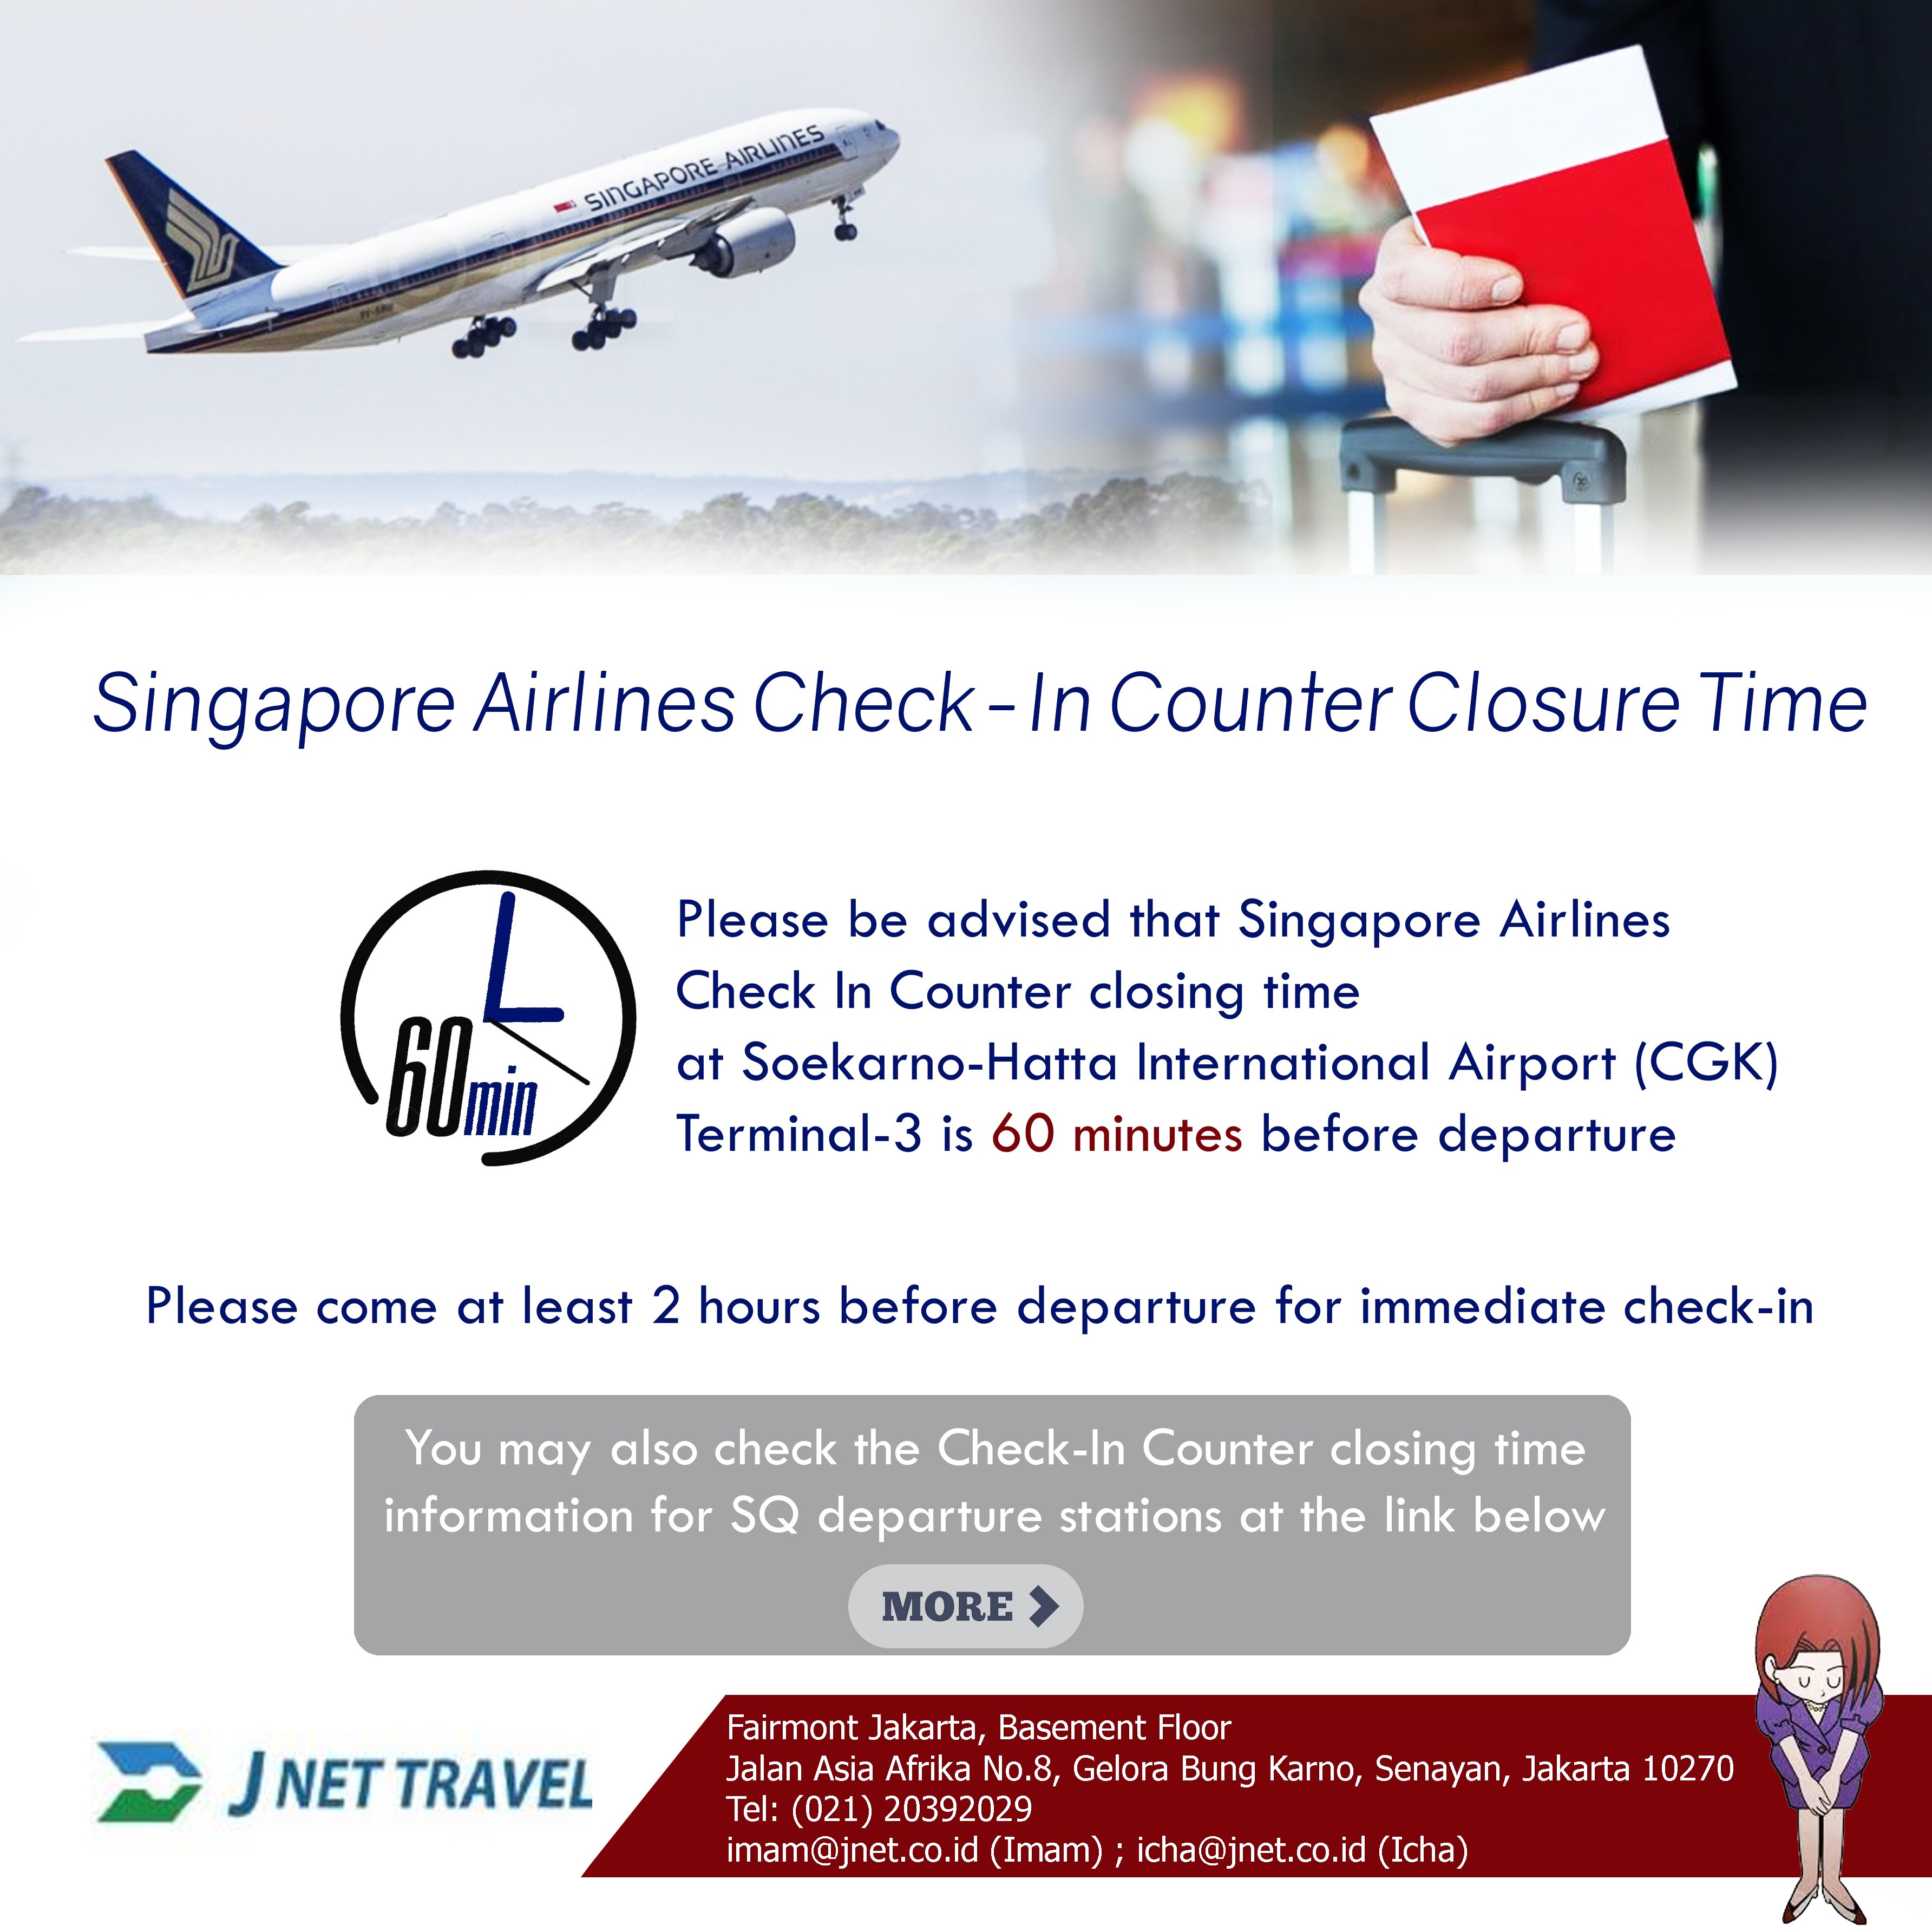 J NET on Twitter: "NEWS : Singapore Airlines (SQ) check-in counter time at Soekarno-Hatta International Airport. / Twitter